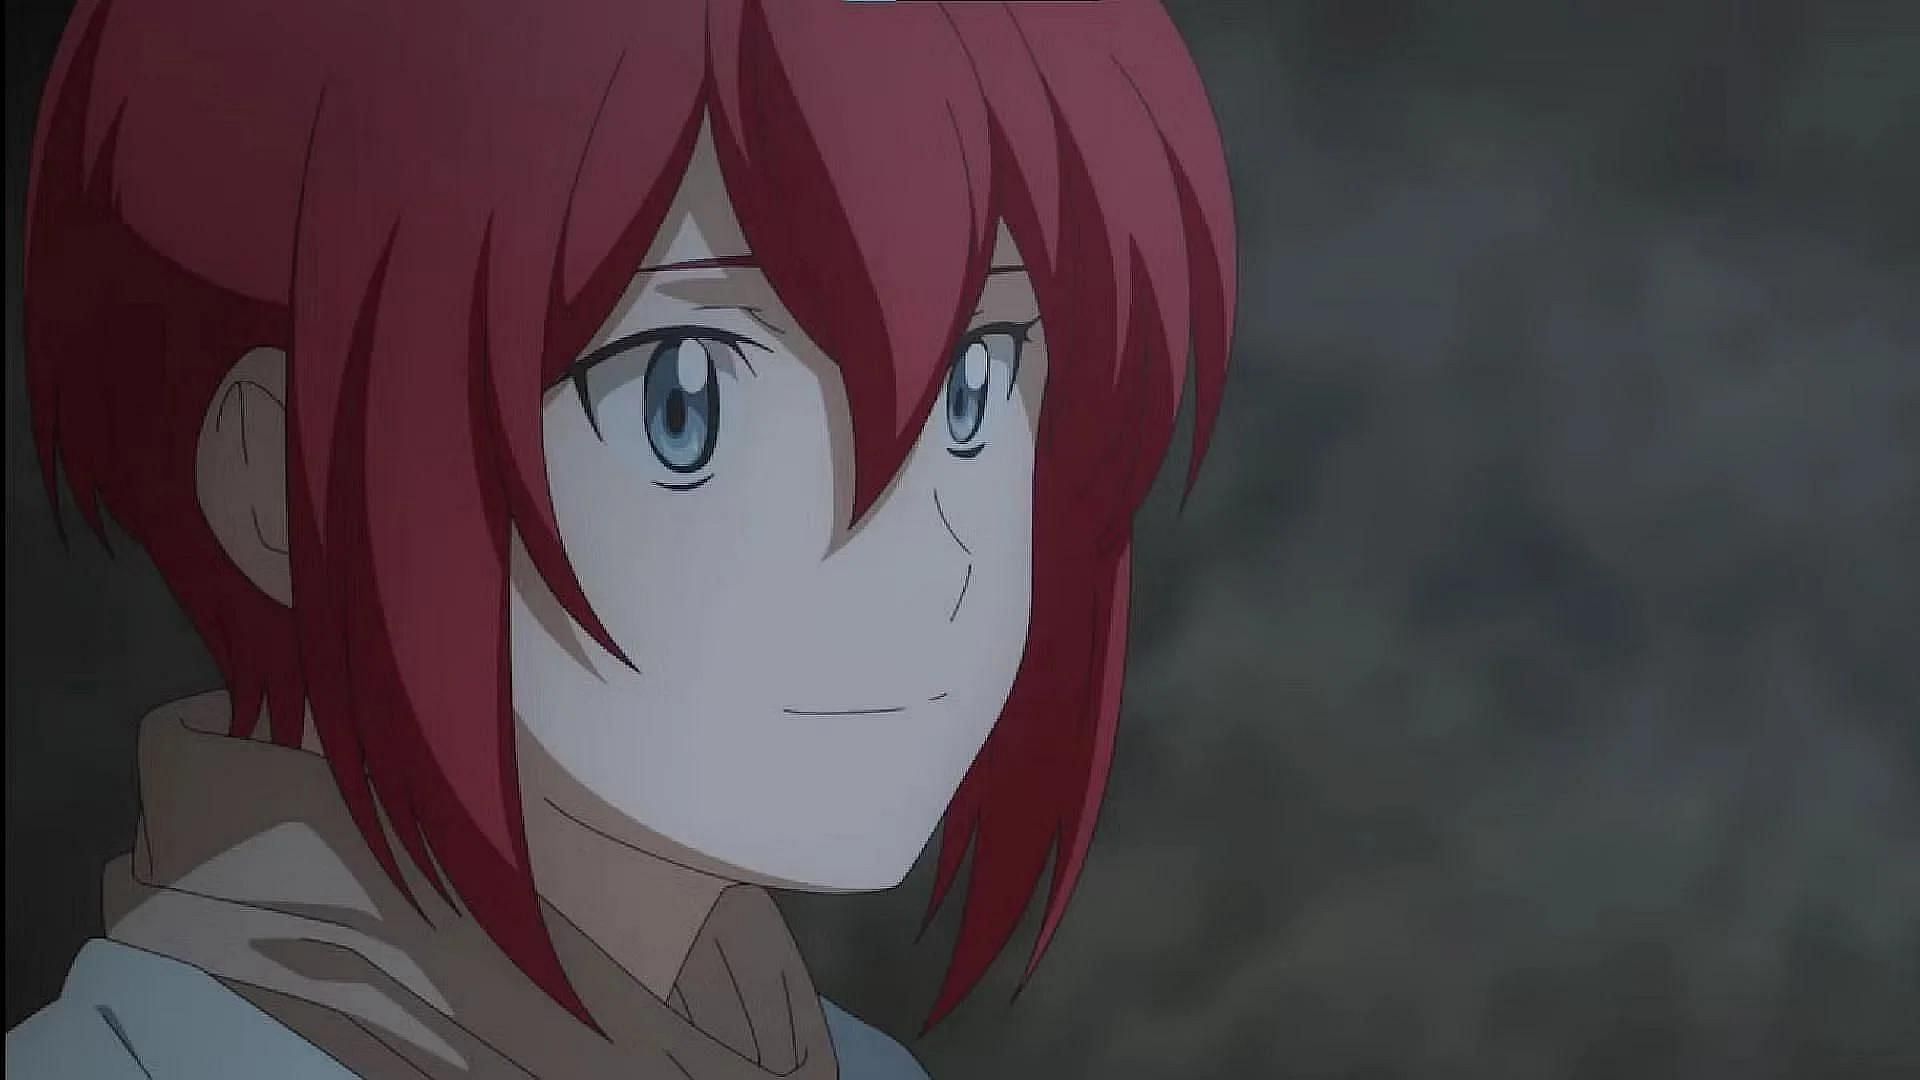 Redhead as shown in the anime (Image via Studio Deen)